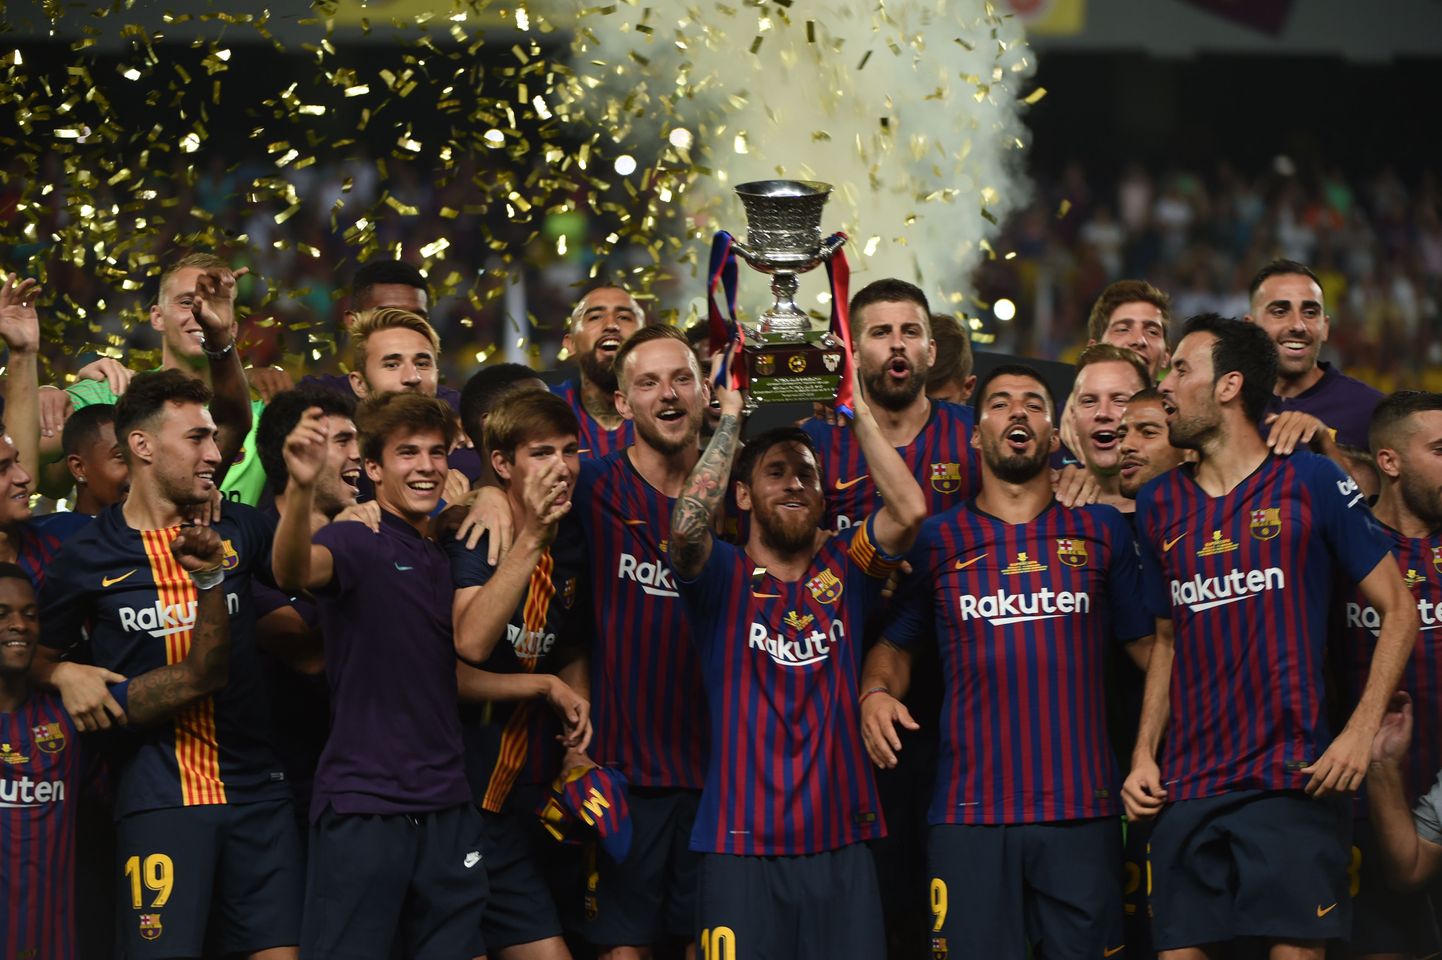 Barcelona's Argentinian forward Lionel Messi (C) carries the cup as they celebrate at the end of the Spanish Super Cup final between Sevilla FC and FC Barcelona at Ibn Batouta Stadium in the Moroccan city of Tangiers on August 12, 2018. - Barcelona defeated Sevilla 2-1 to win the Spanish Super Cup. (Photo by FADEL SENNA / AFP)